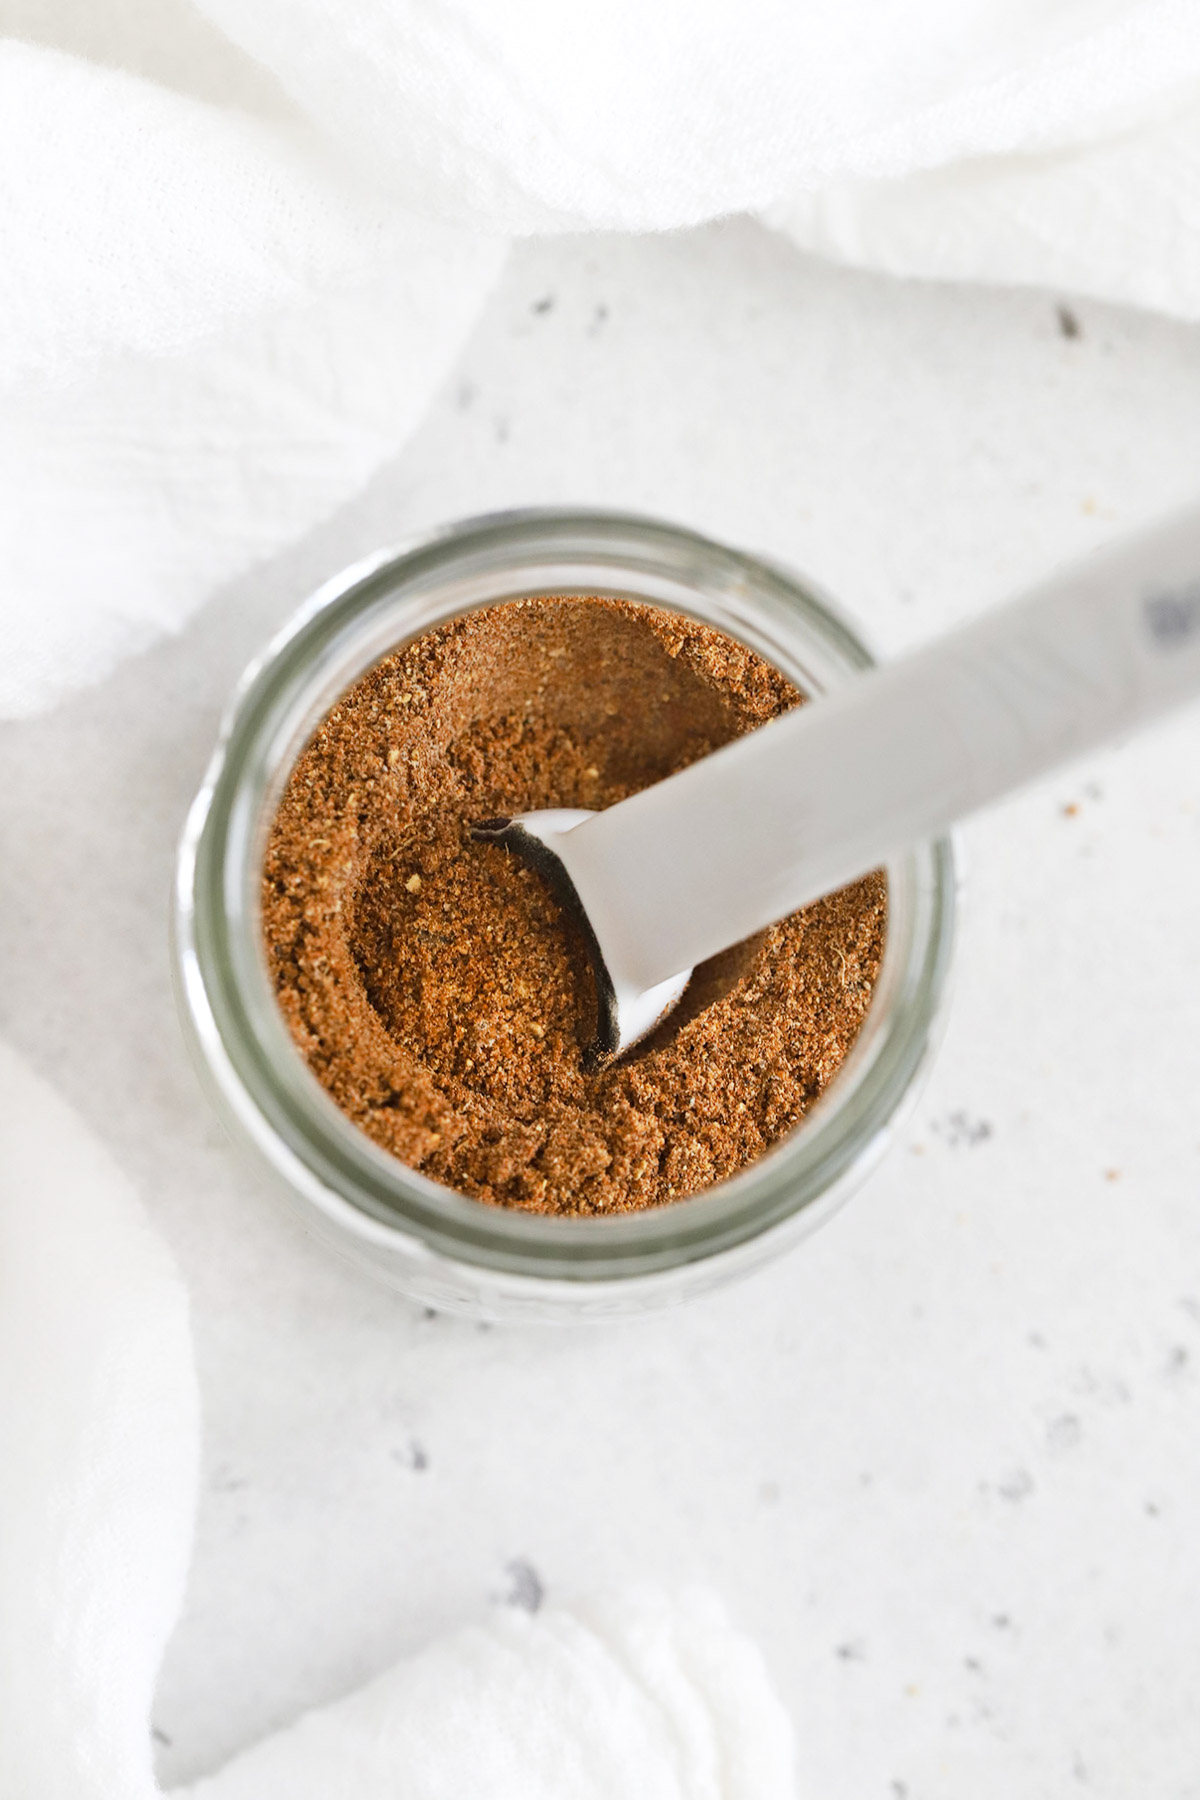 Overhead view of a jar of homemade chai spice mix